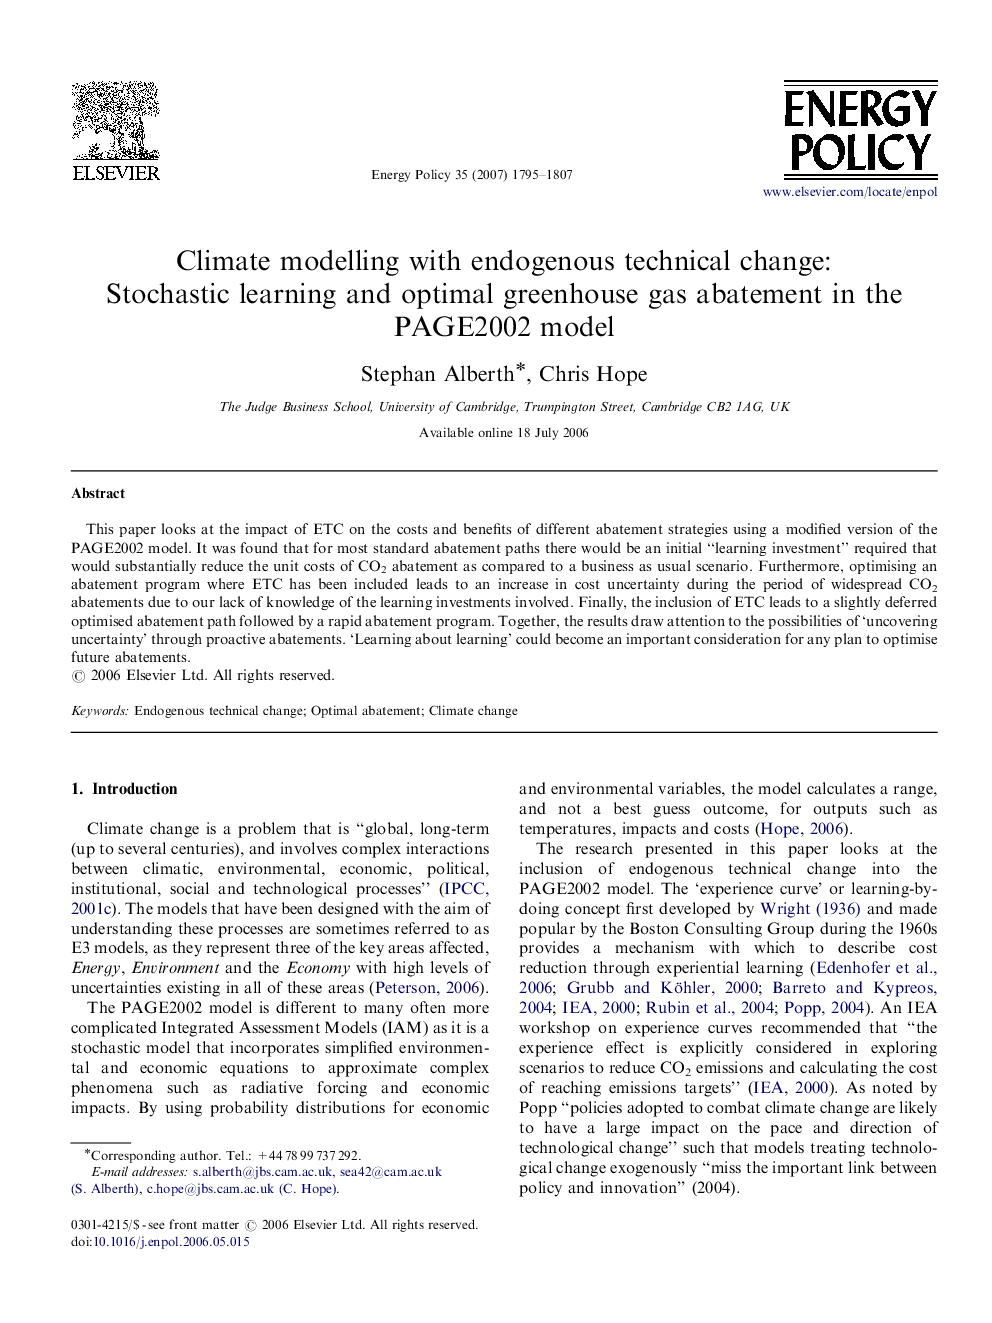 Climate modelling with endogenous technical change: Stochastic learning and optimal greenhouse gas abatement in the PAGE2002 model